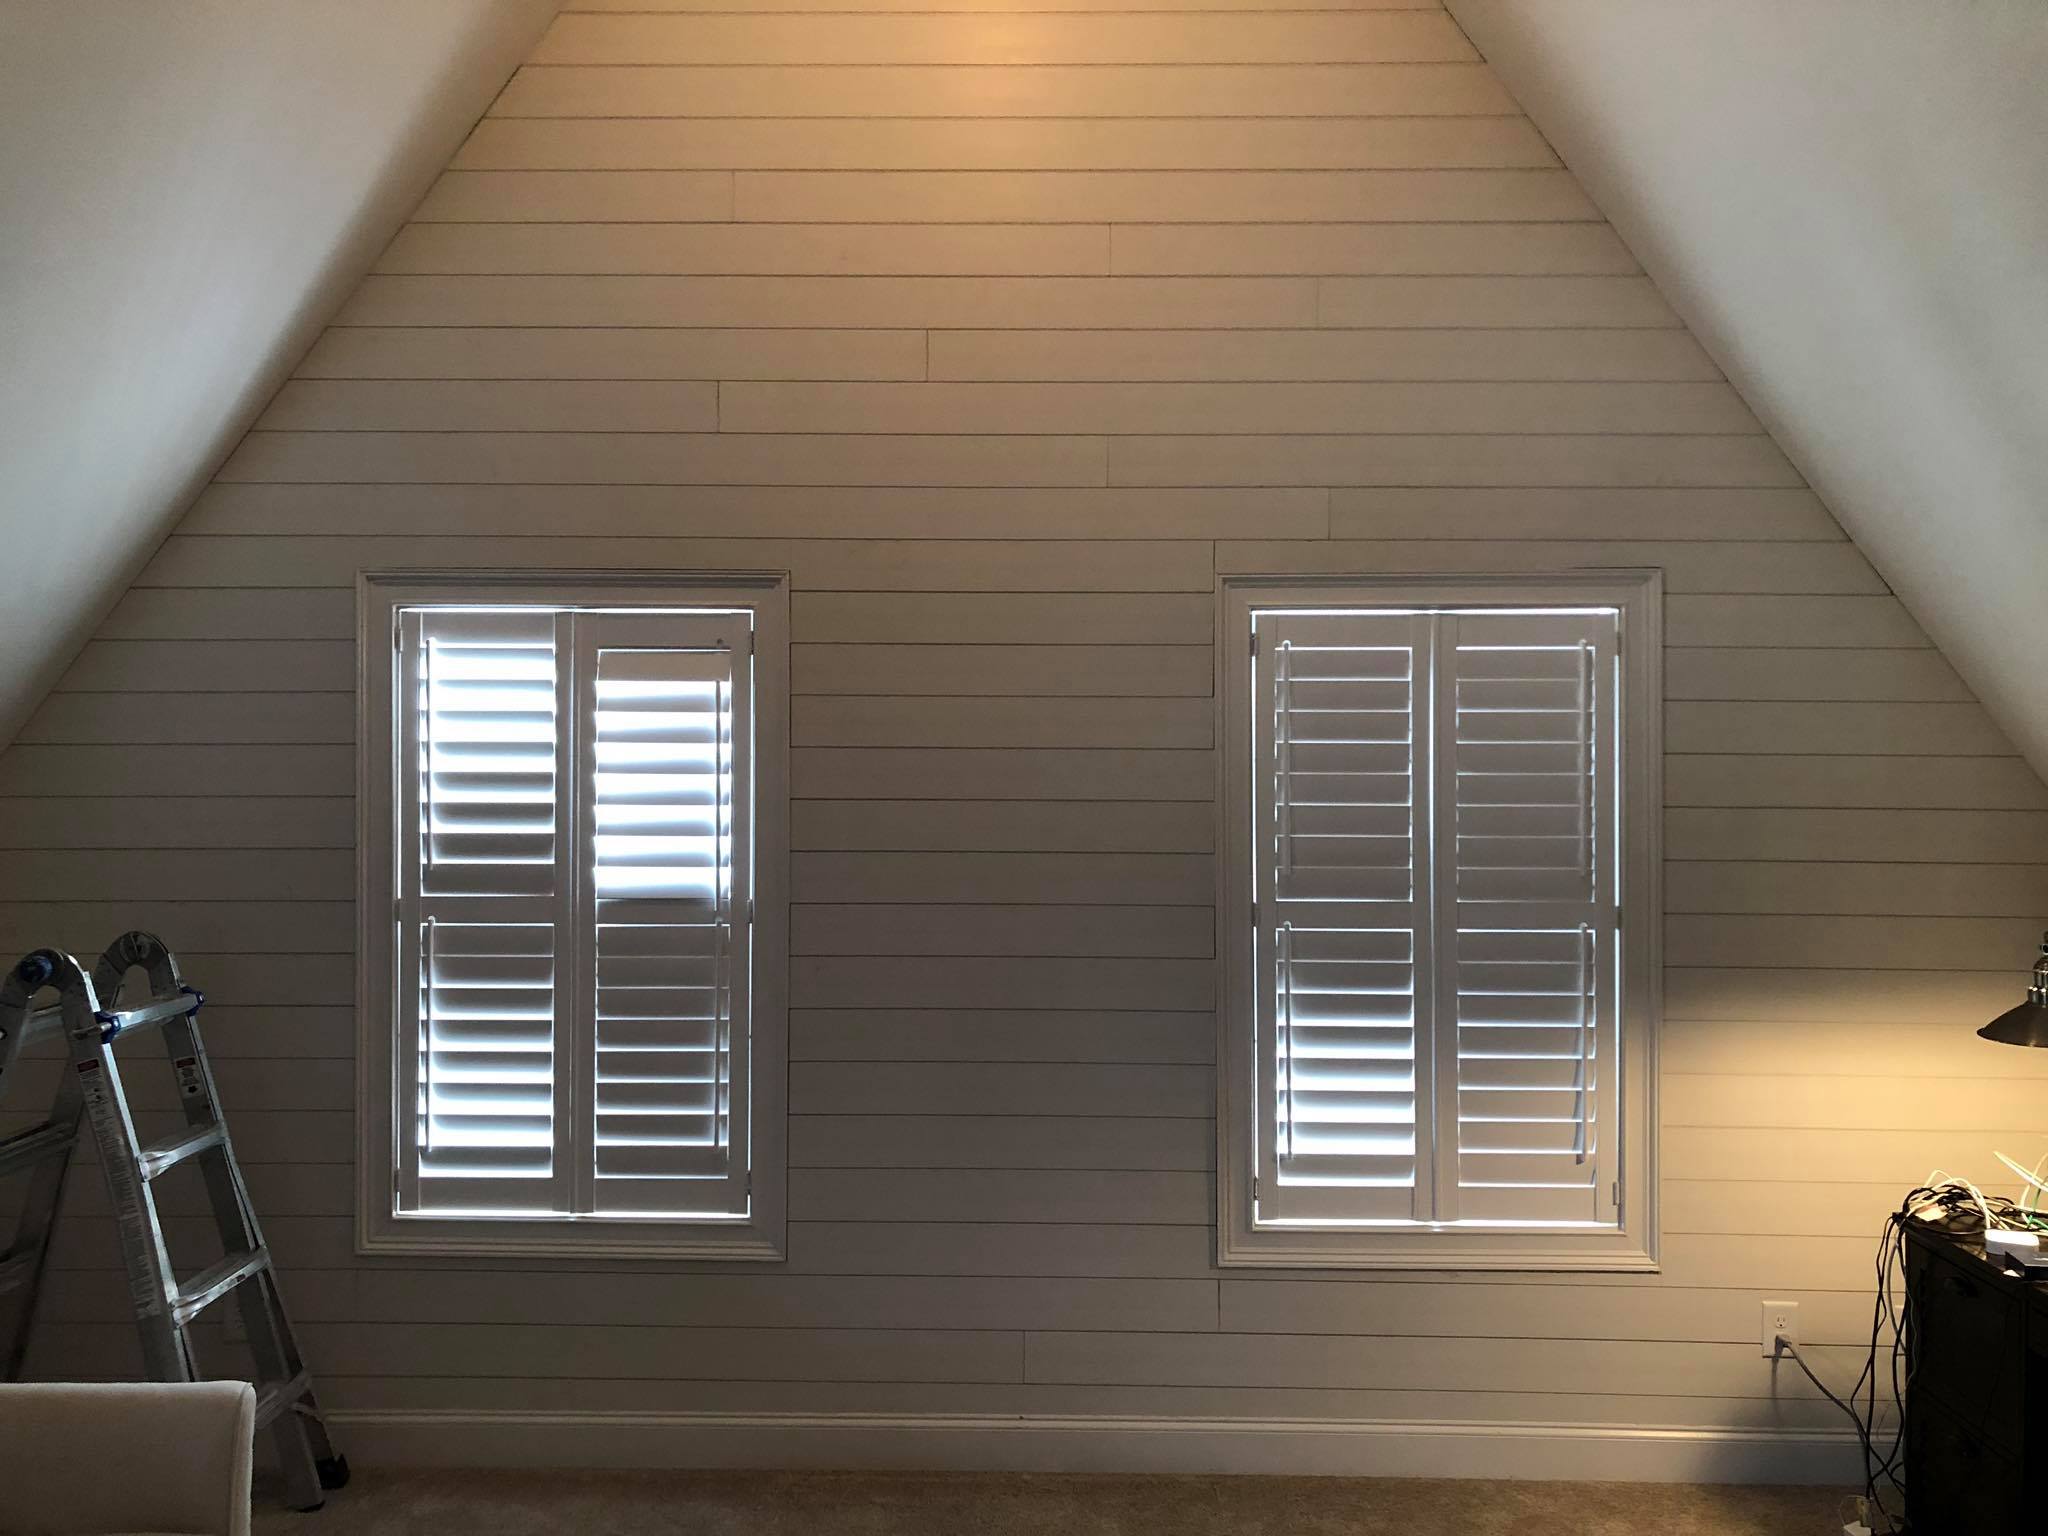 Shiplap On Walls Painted White with Hardwood Floor Installed 8